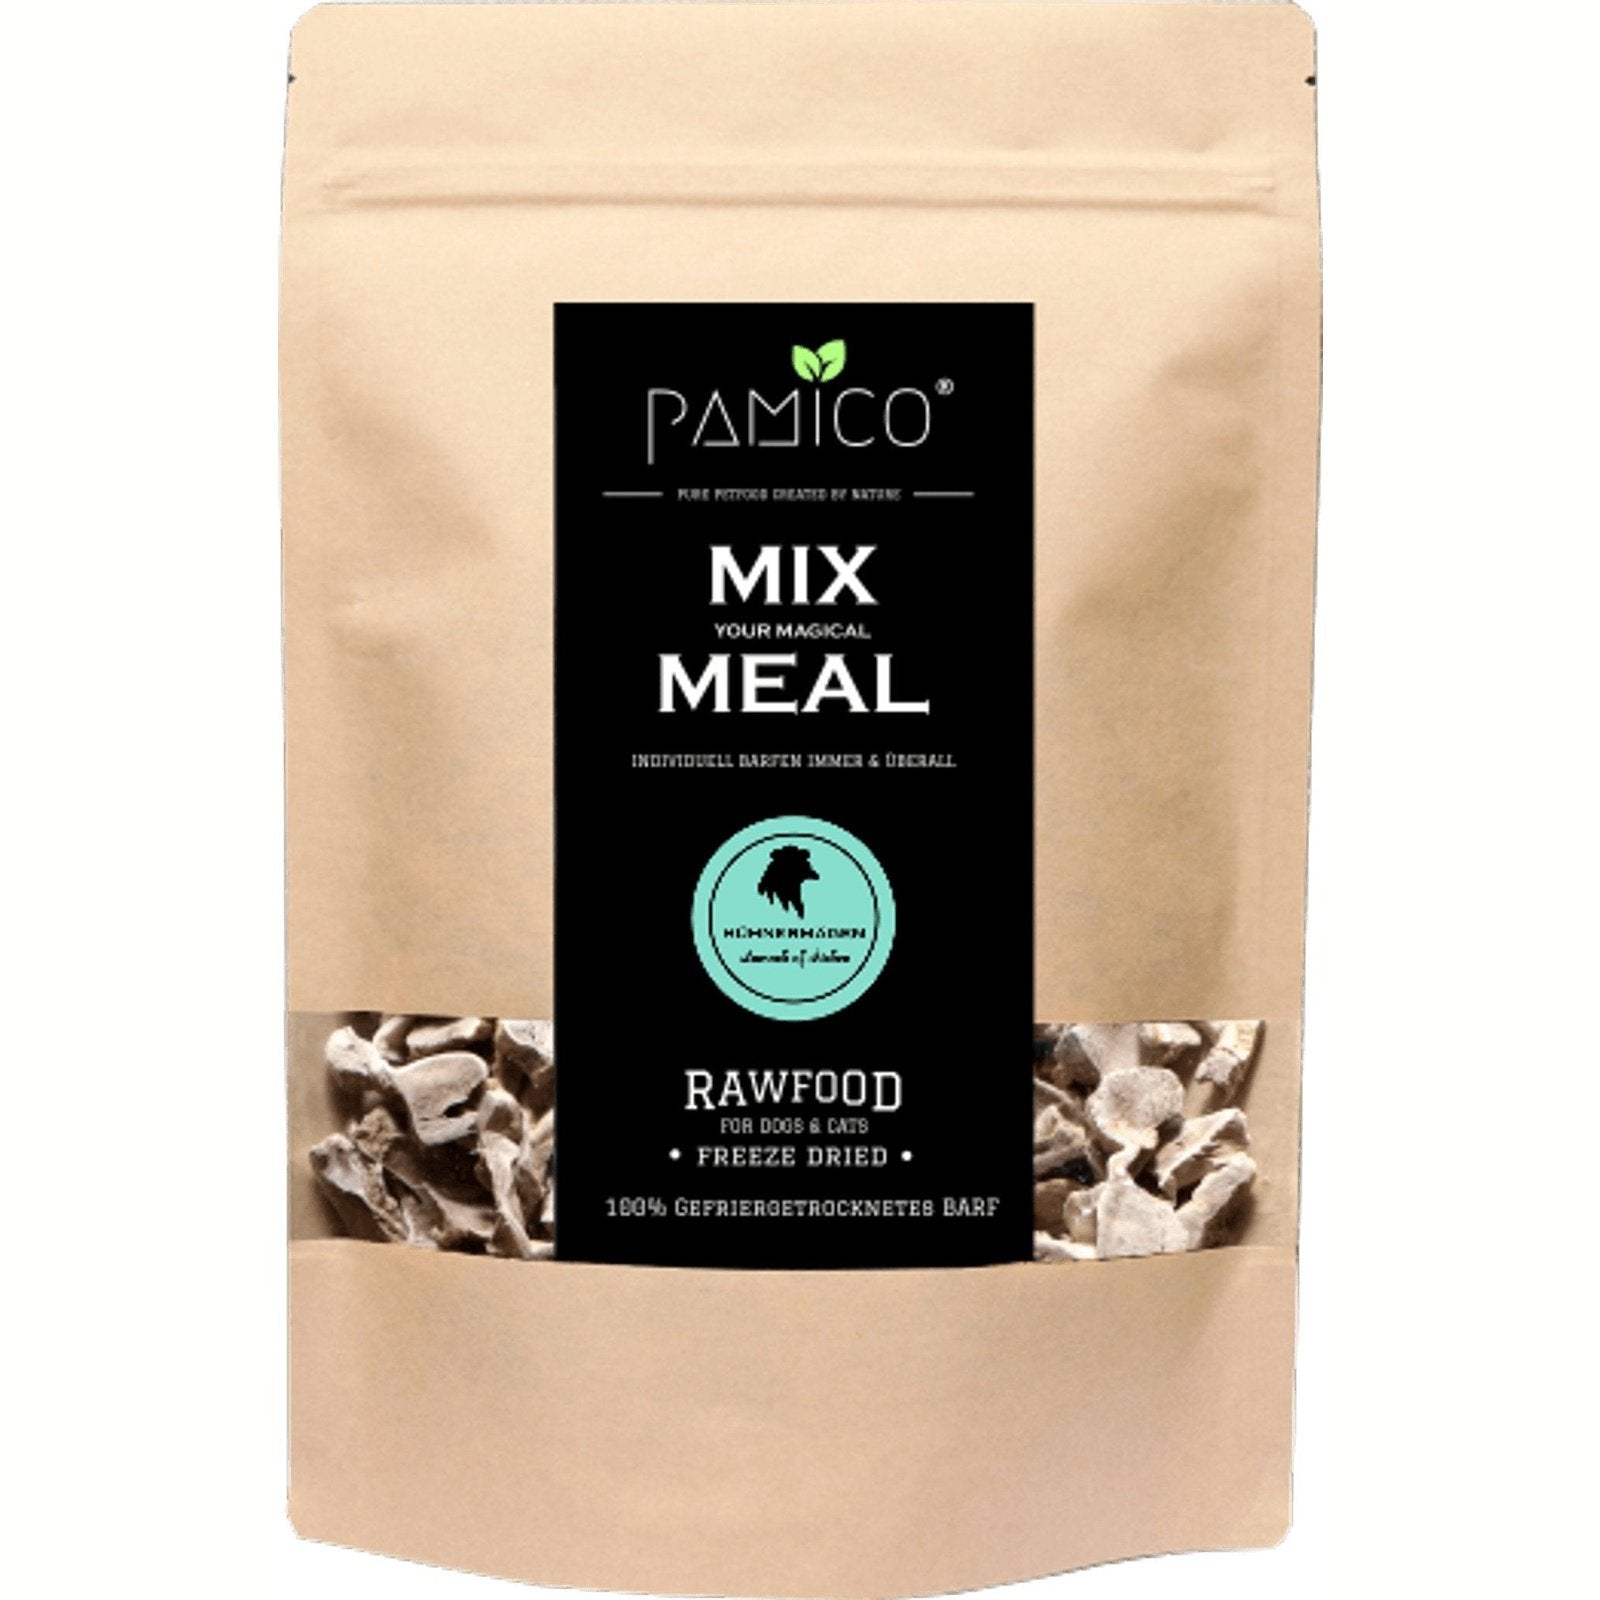 PAMICO - Mix Meal Chicken Gizzards Freeze-dried 90g - Pets Villa